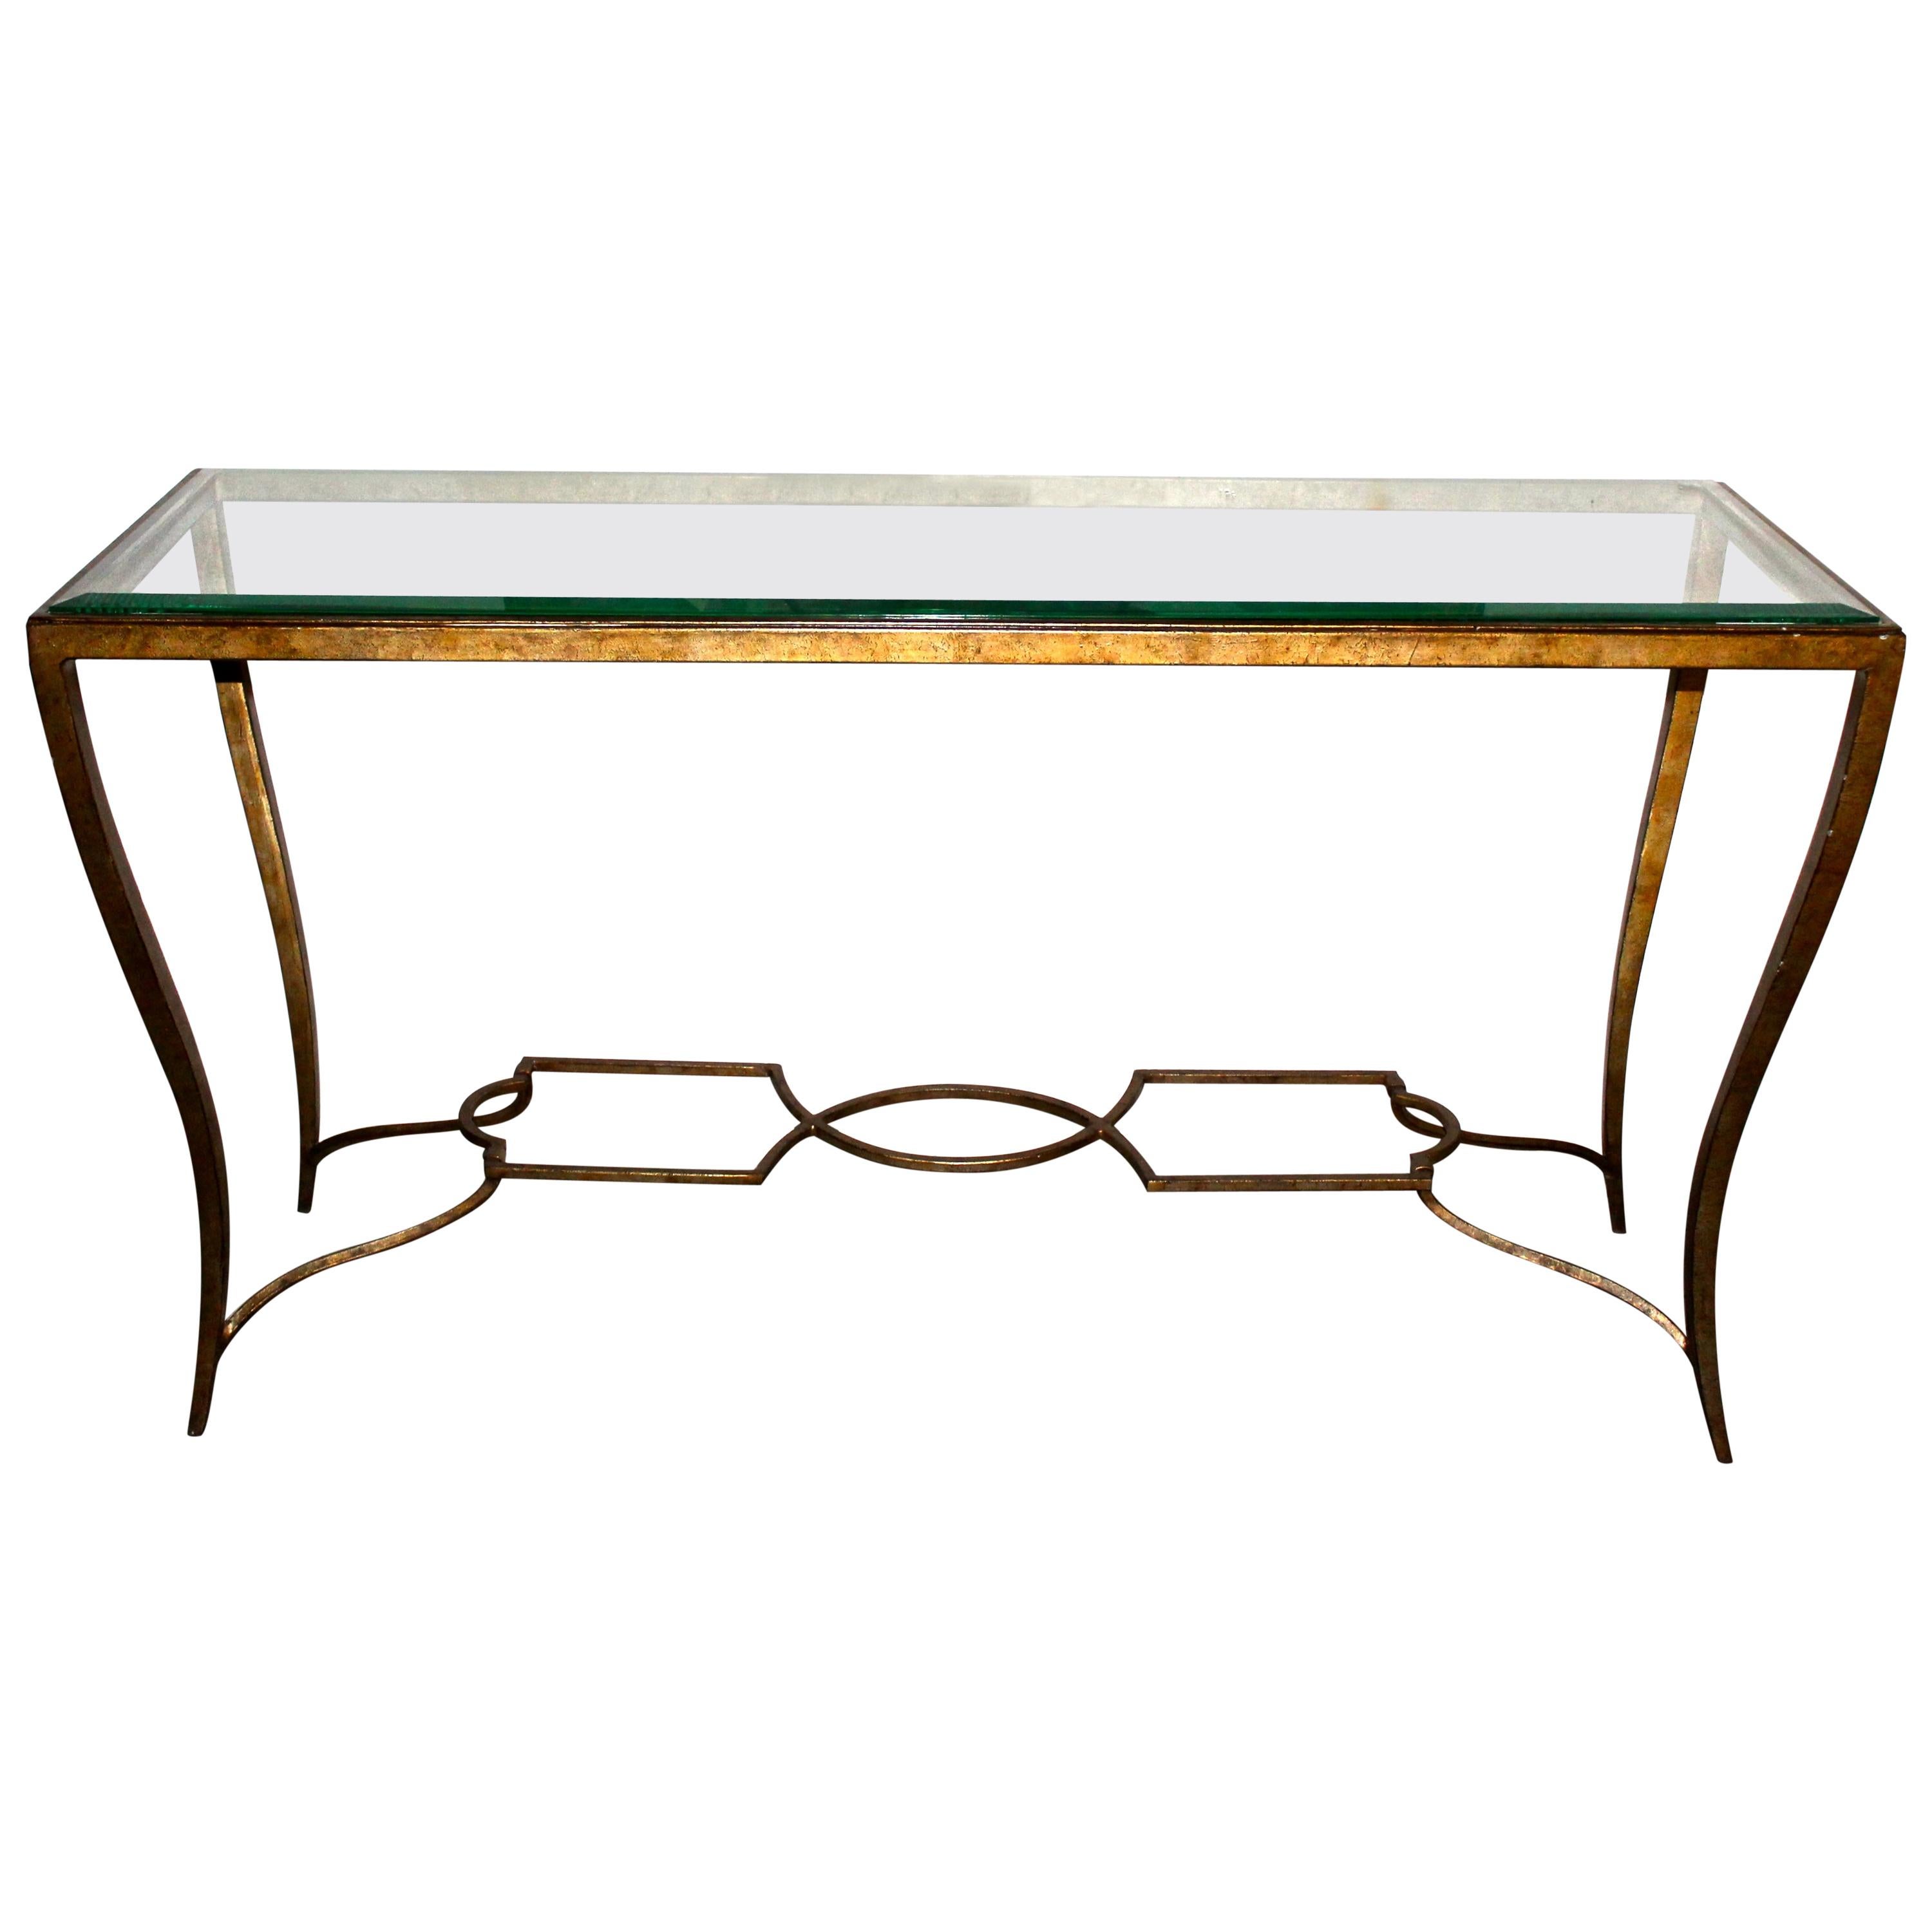 Maison Jansen Style Gilt Wrought Iron and Beveled Glass Console For Sale